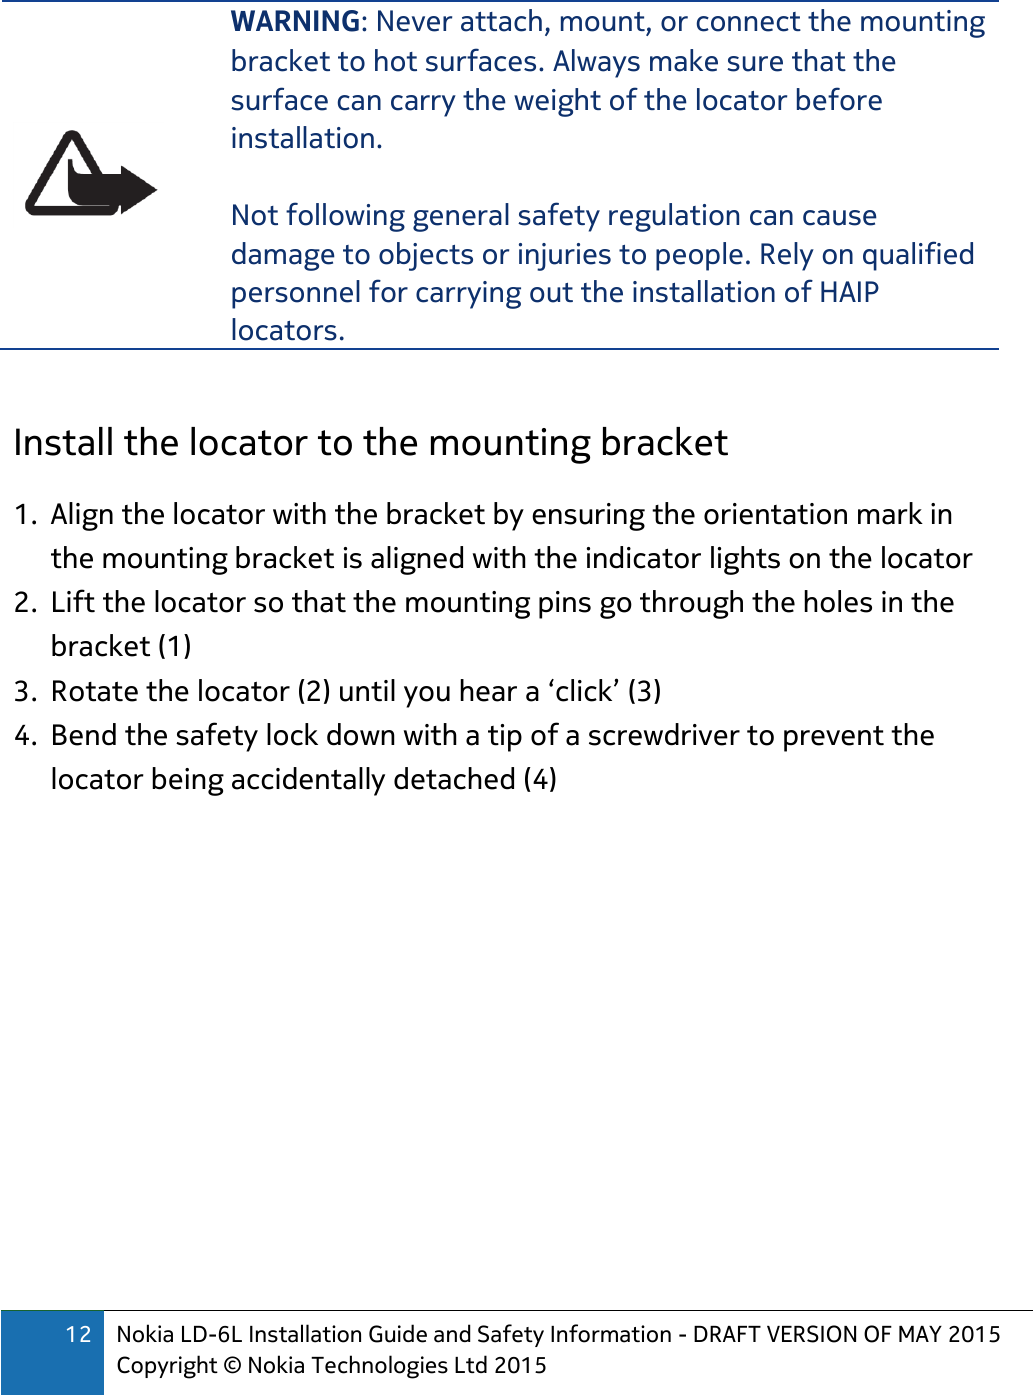 12 Nokia LD-6L Installation Guide and Safety Information - DRAFT VERSION OF MAY 2015 Copyright © Nokia Technologies Ltd 2015   WARNING: Never attach, mount, or connect the mounting bracket to hot surfaces. Always make sure that the surface can carry the weight of the locator before installation.  Not following general safety regulation can cause damage to objects or injuries to people. Rely on qualified personnel for carrying out the installation of HAIP locators.  Install the locator to the mounting bracket 1. Align the locator with the bracket by ensuring the orientation mark in the mounting bracket is aligned with the indicator lights on the locator 2. Lift the locator so that the mounting pins go through the holes in the bracket (1) 3. Rotate the locator (2) until you hear a ‘click’ (3) 4. Bend the safety lock down with a tip of a screwdriver to prevent the locator being accidentally detached (4)  